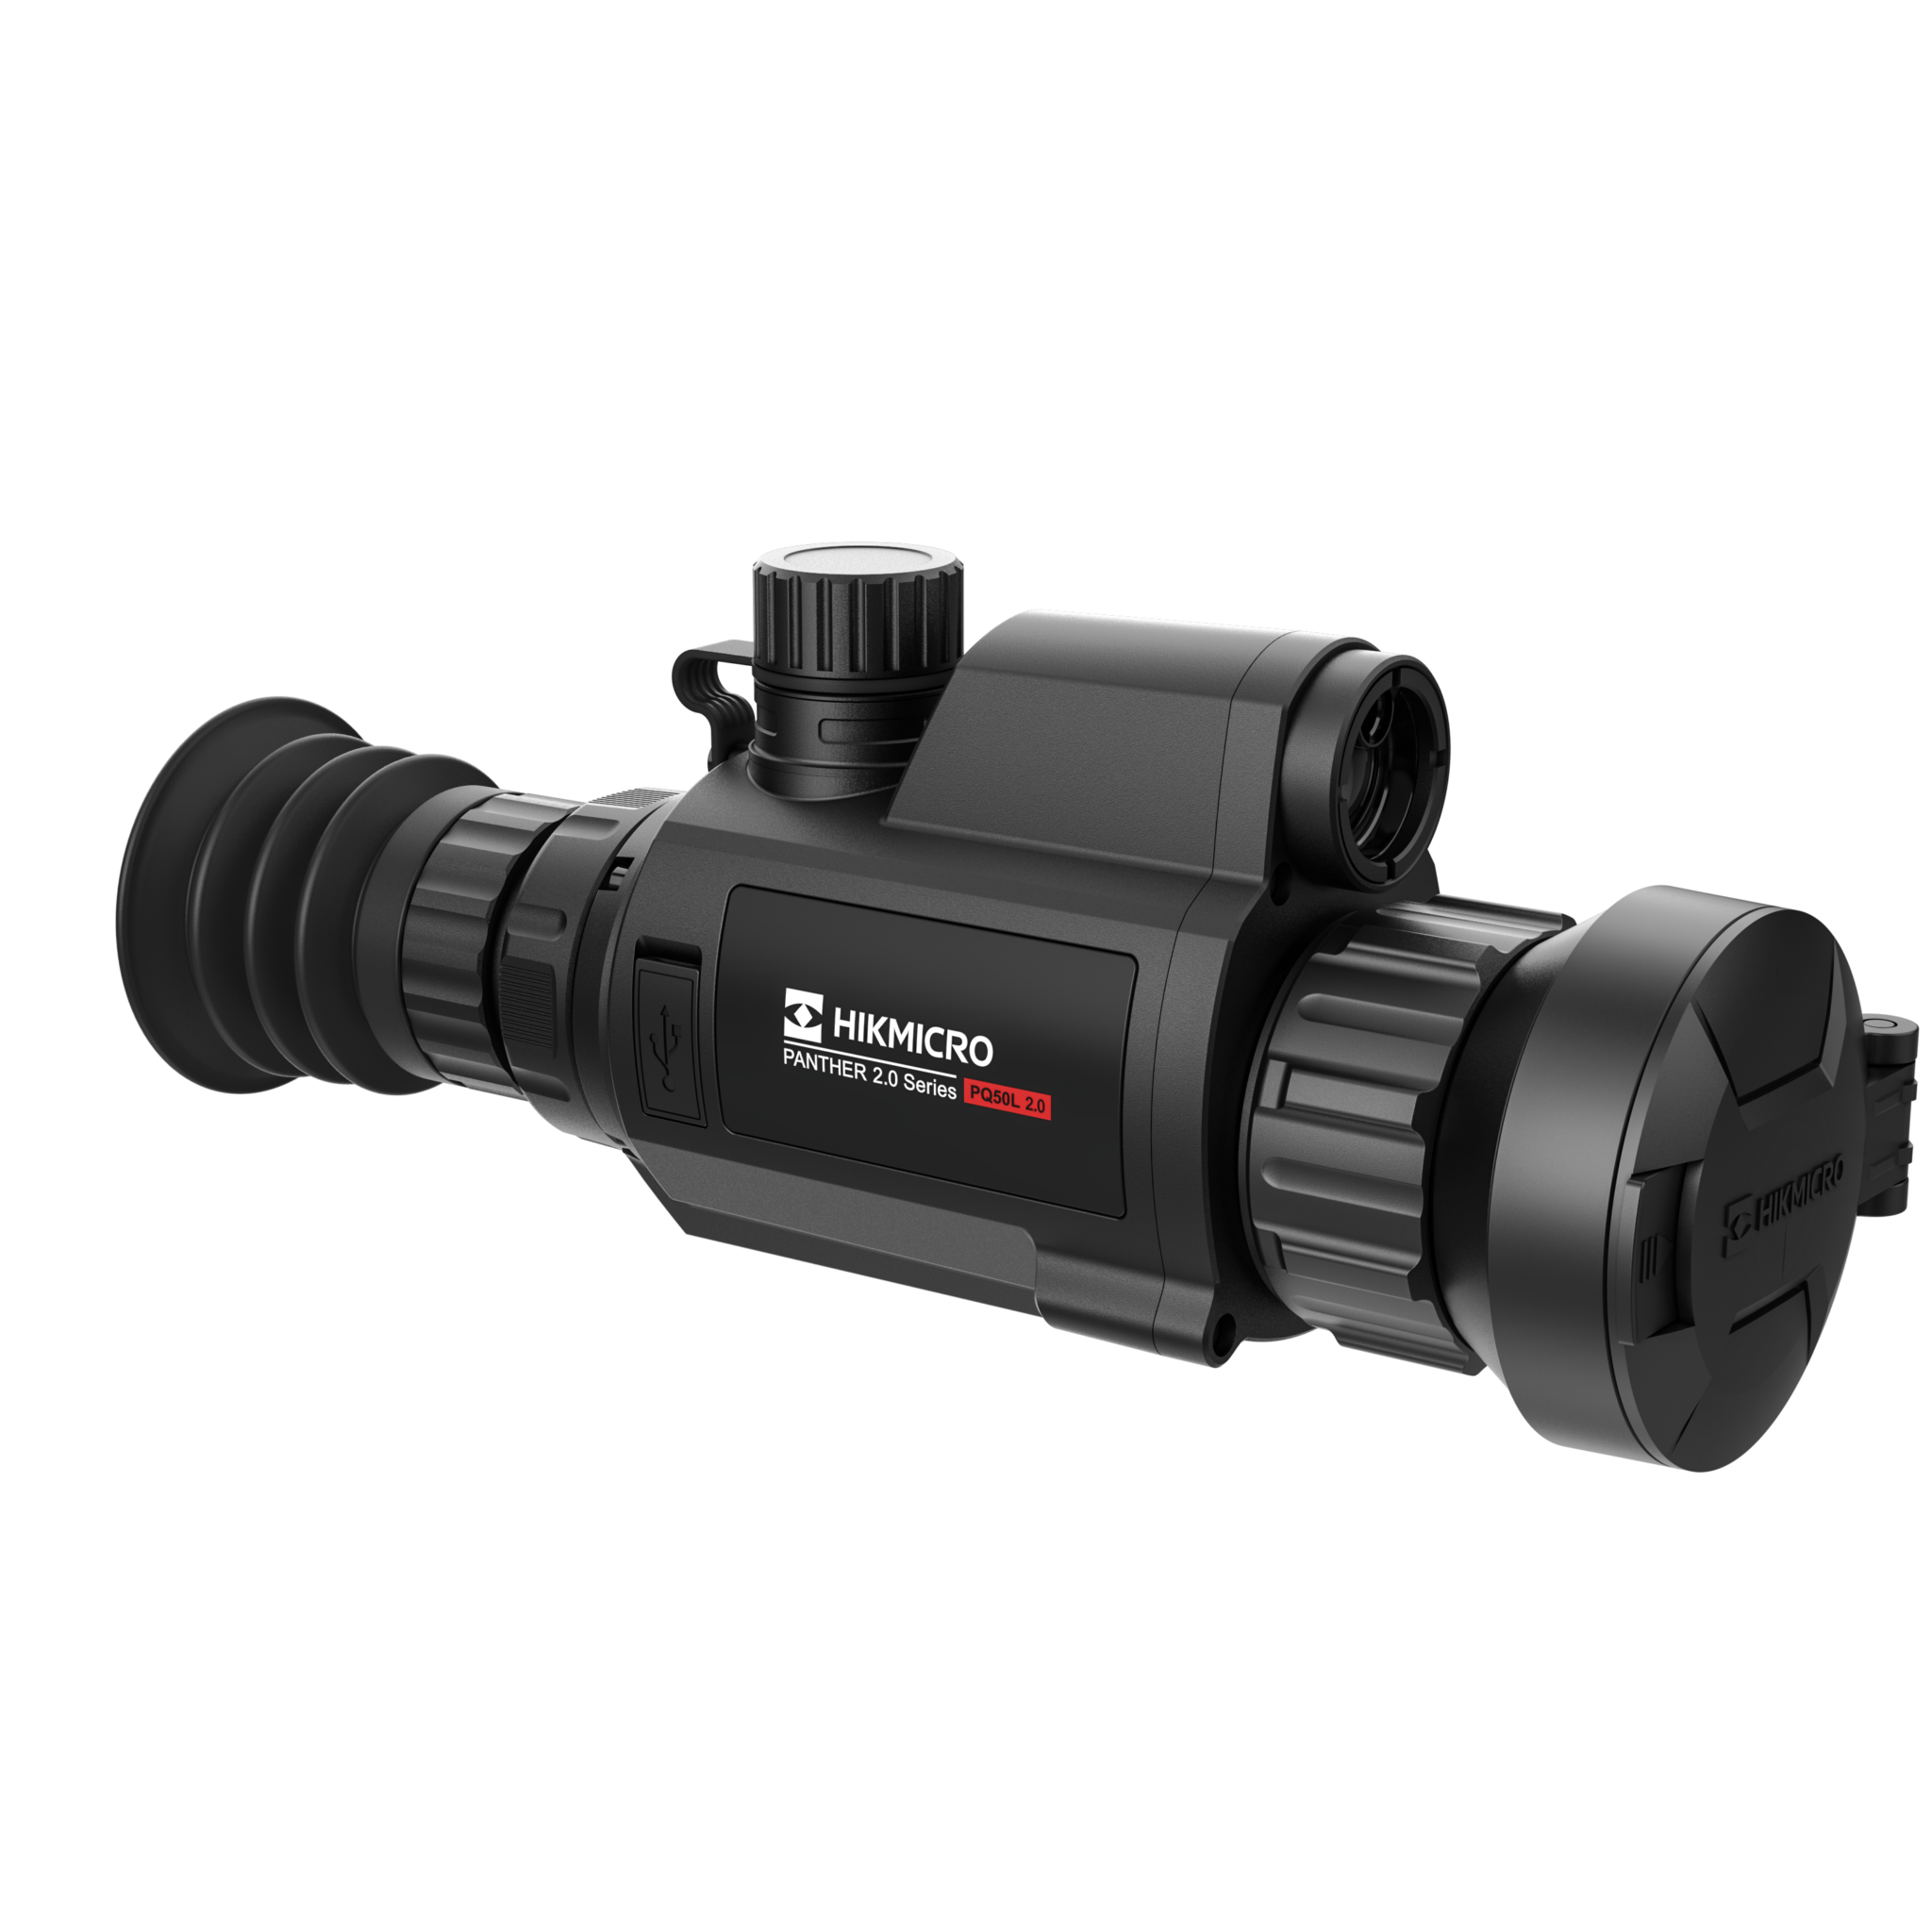 HIKMICRO Panther 2.0 PQ50L Thermal Scope